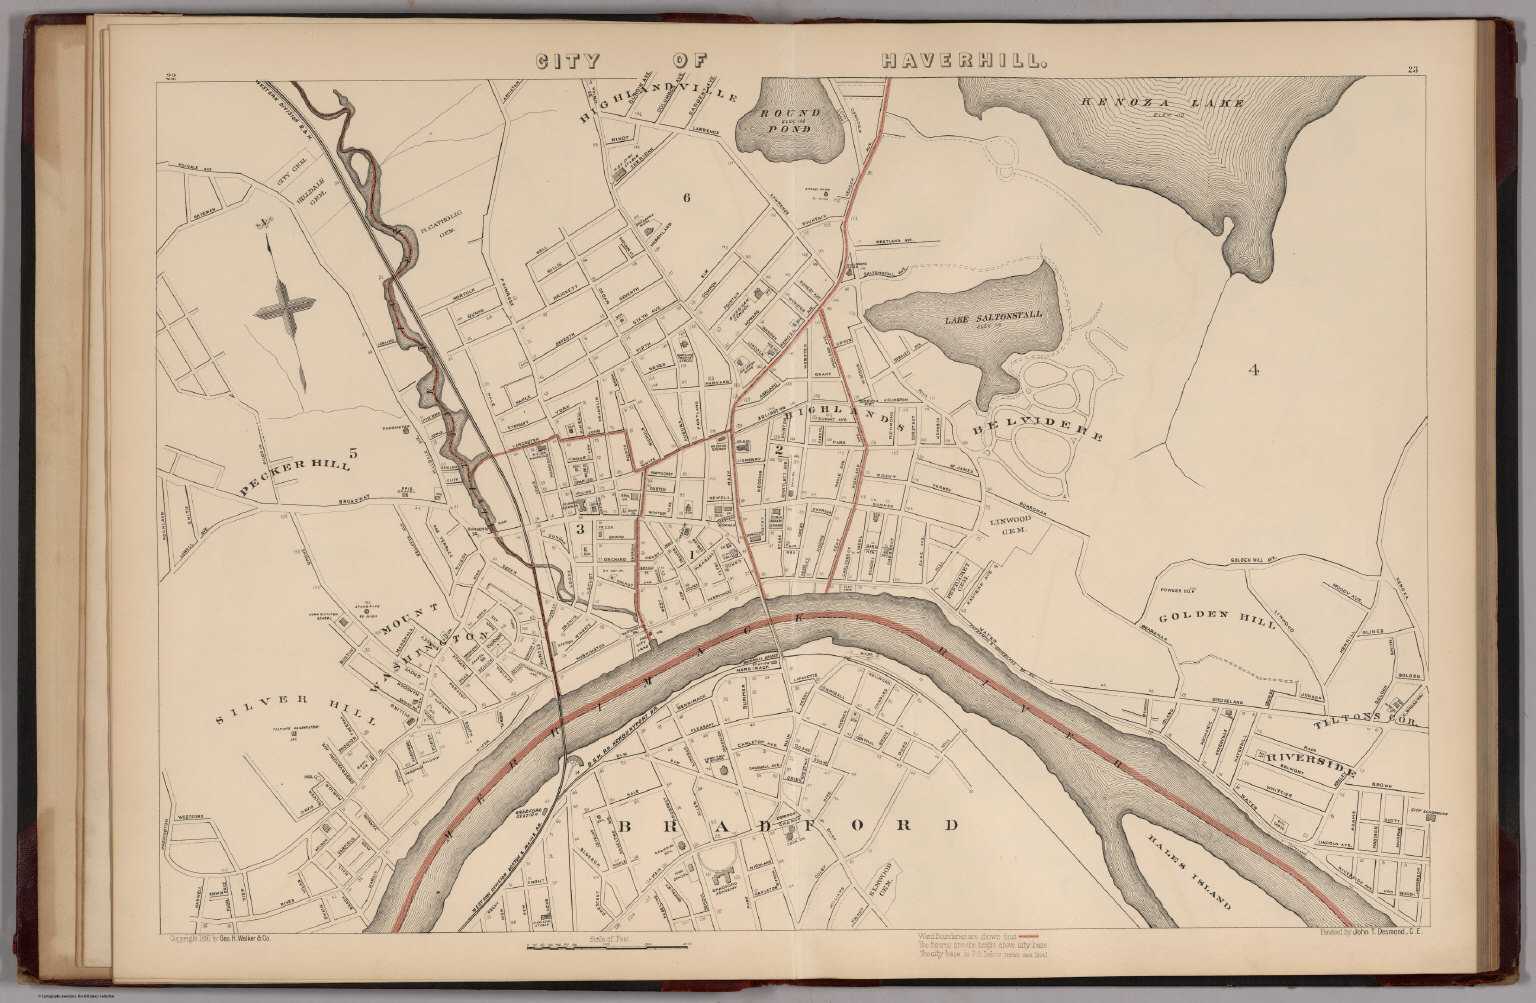 City of Haverhill, Massachusetts. David Rumsey Historical Map Collection